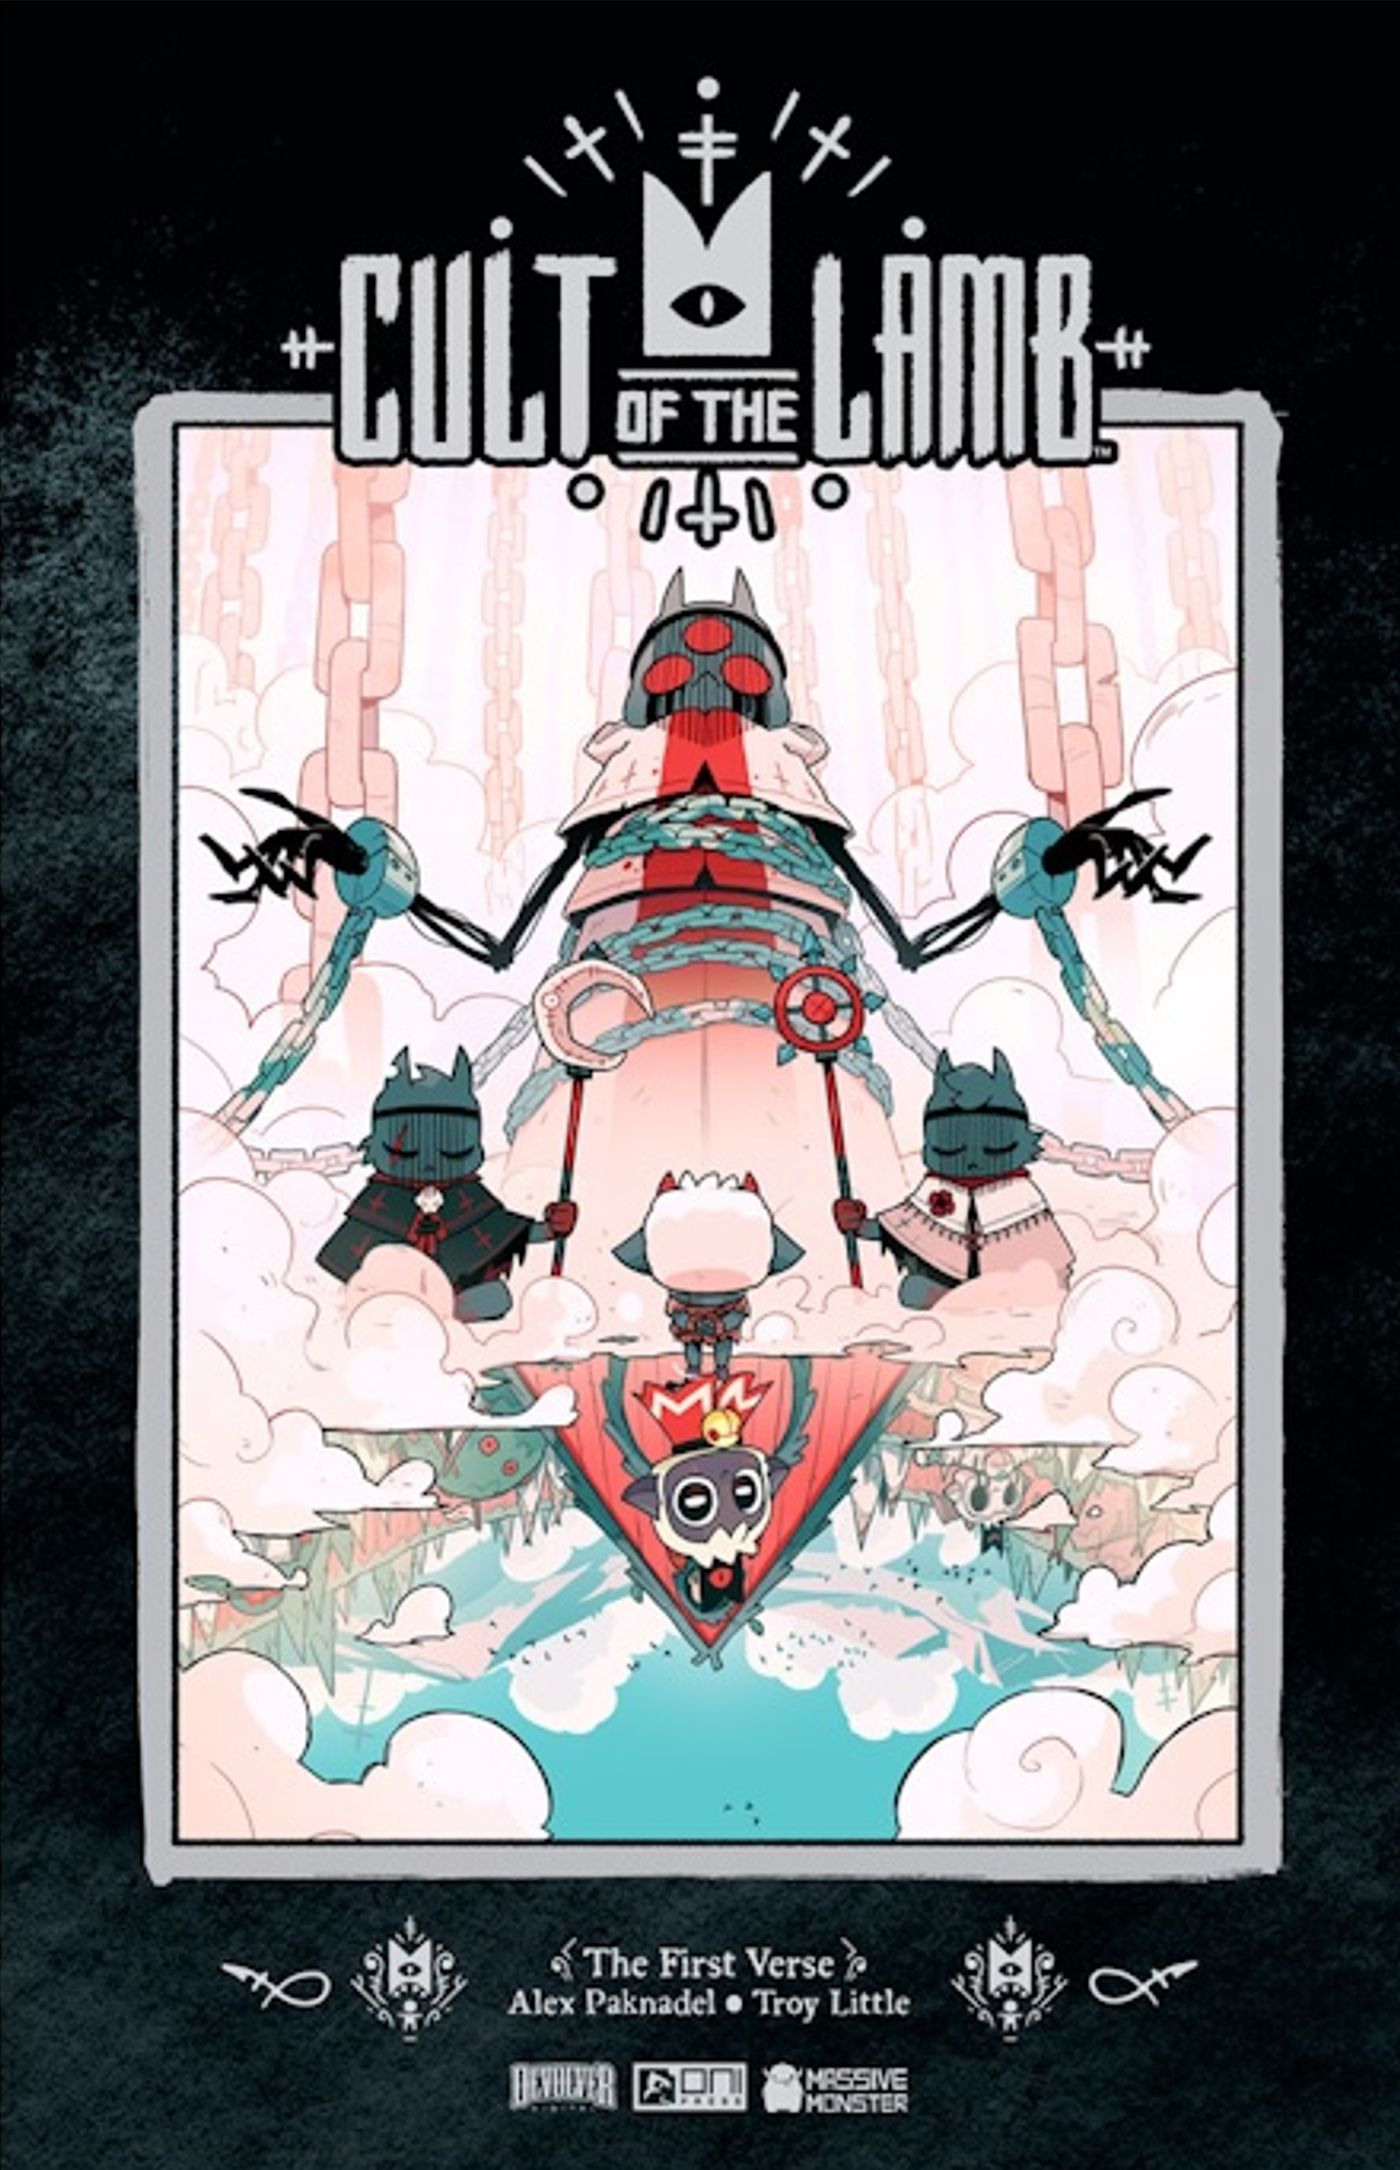 Cult of the Lamb The First Verse Third Comic Cover Featuring the Lamb Confronting His Deity and Rescuer